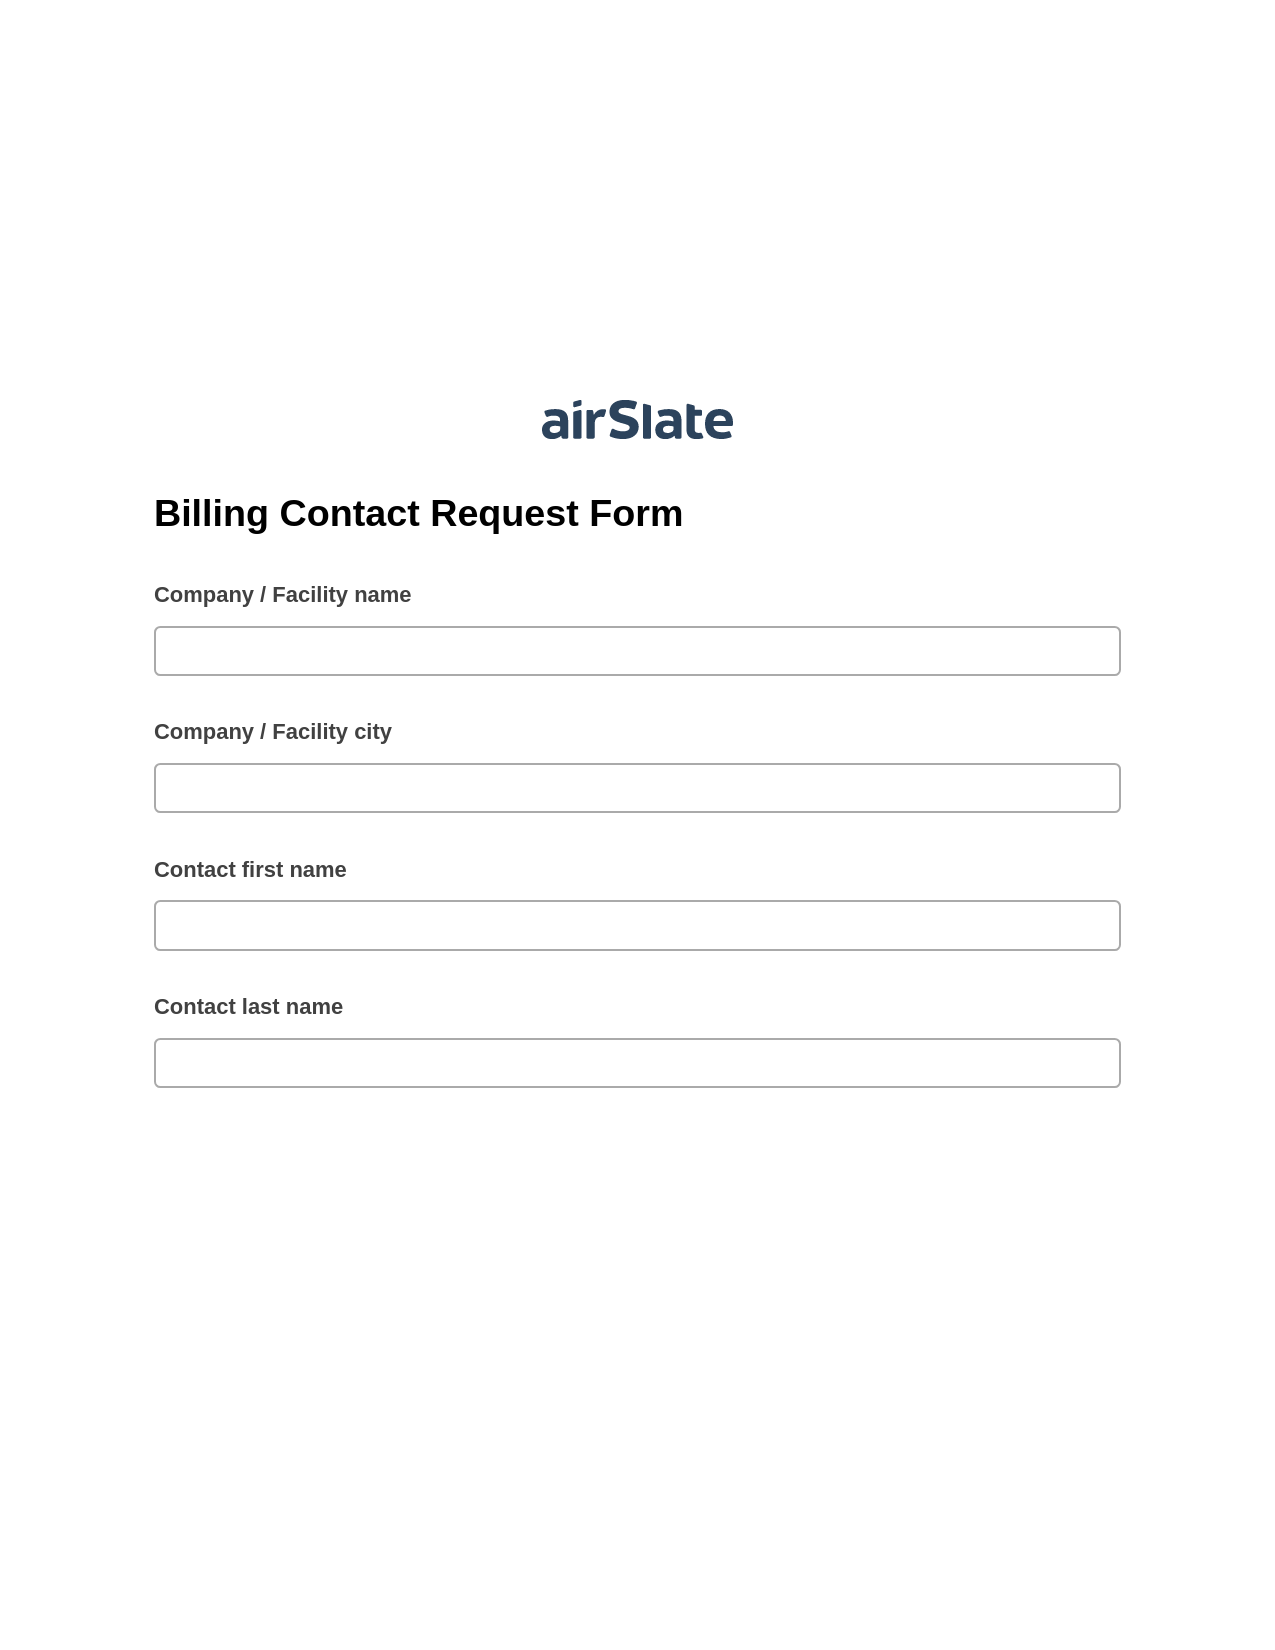 Billing Contact Request Form Pre-fill from NetSuite Records Bot, Hide Signatures Bot, Post-finish Document Bot